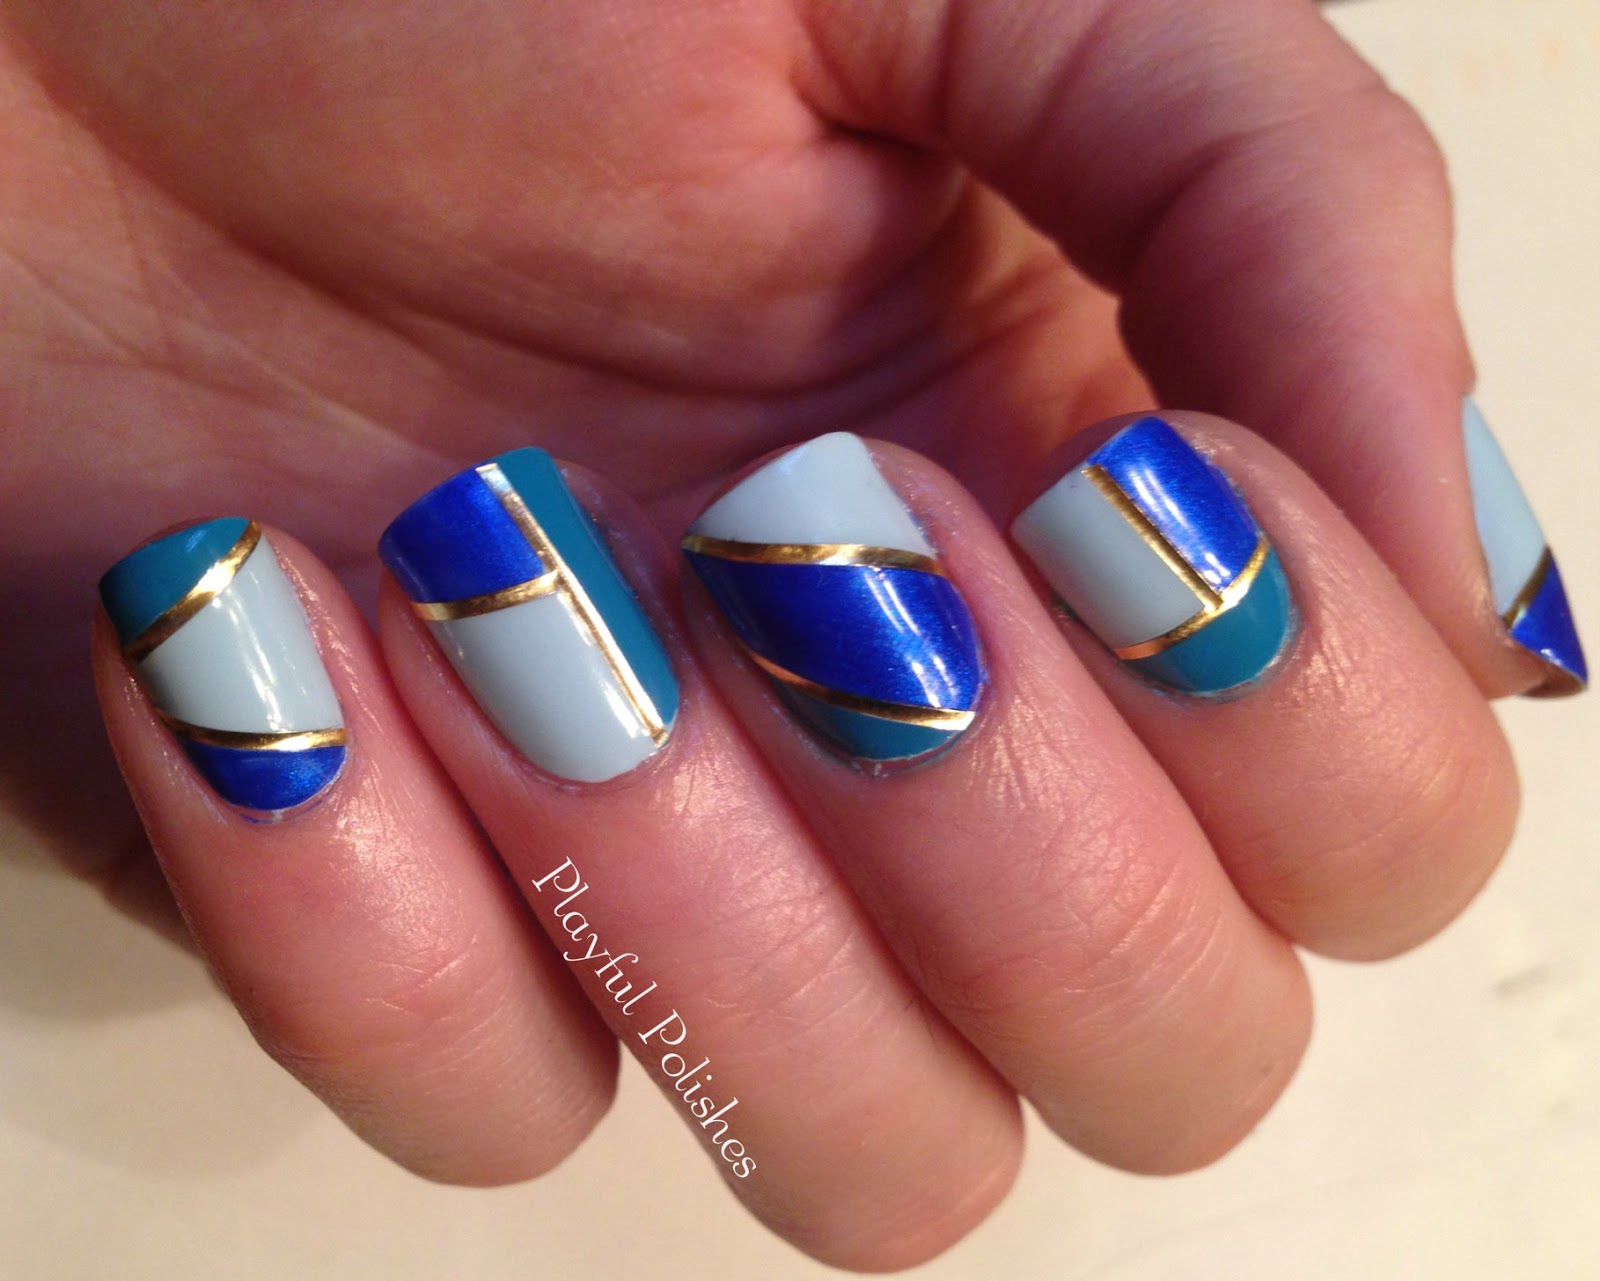 1. How to Use Nail Art Striping Tape for Perfect Designs - wide 11